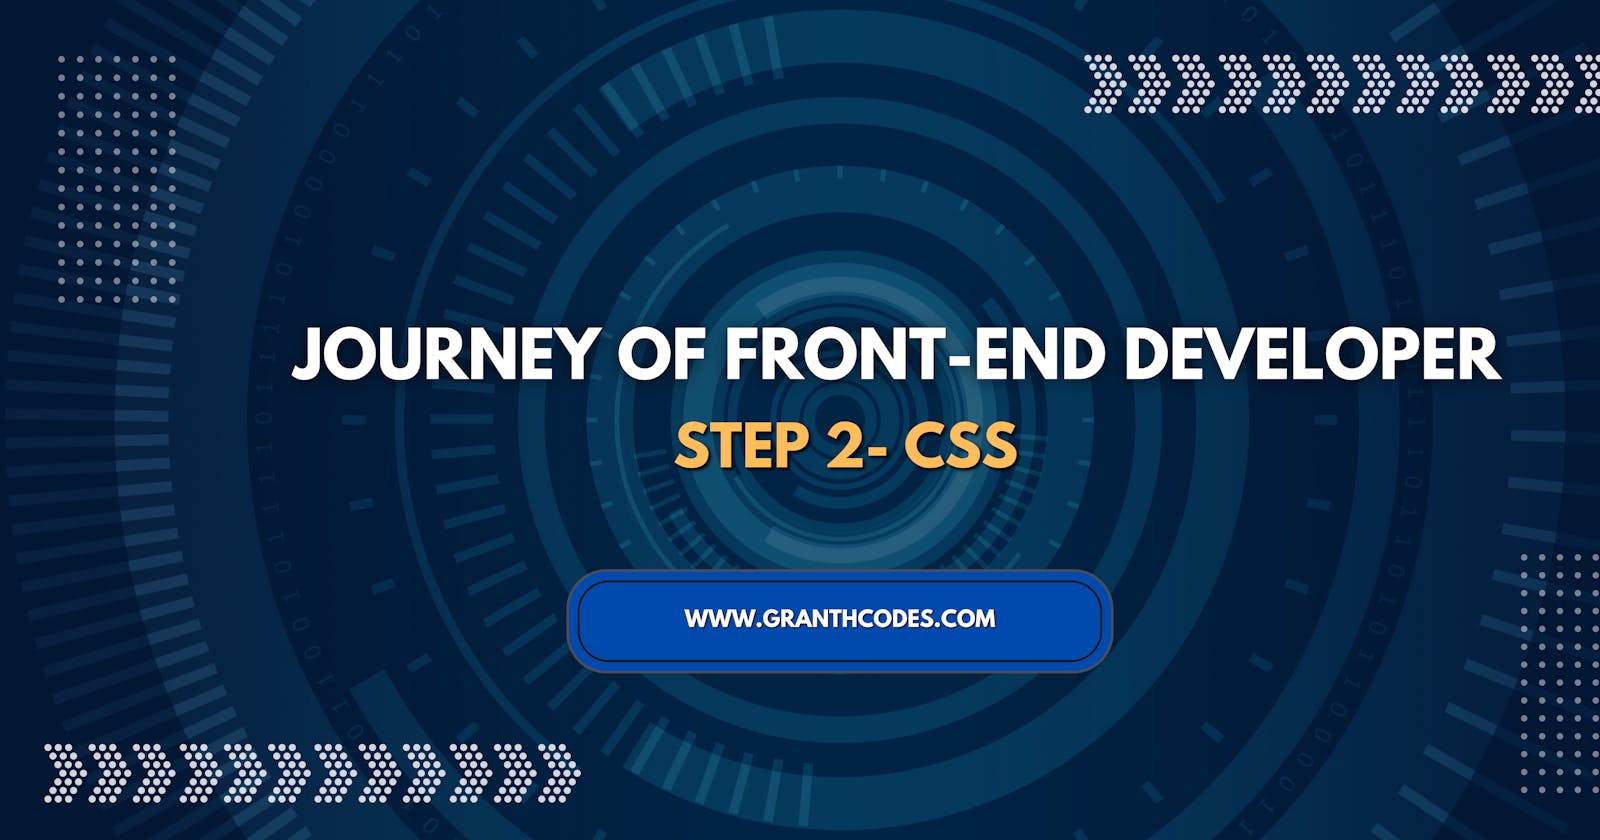 Journey Of  the Front-end Developer step 2 is Css